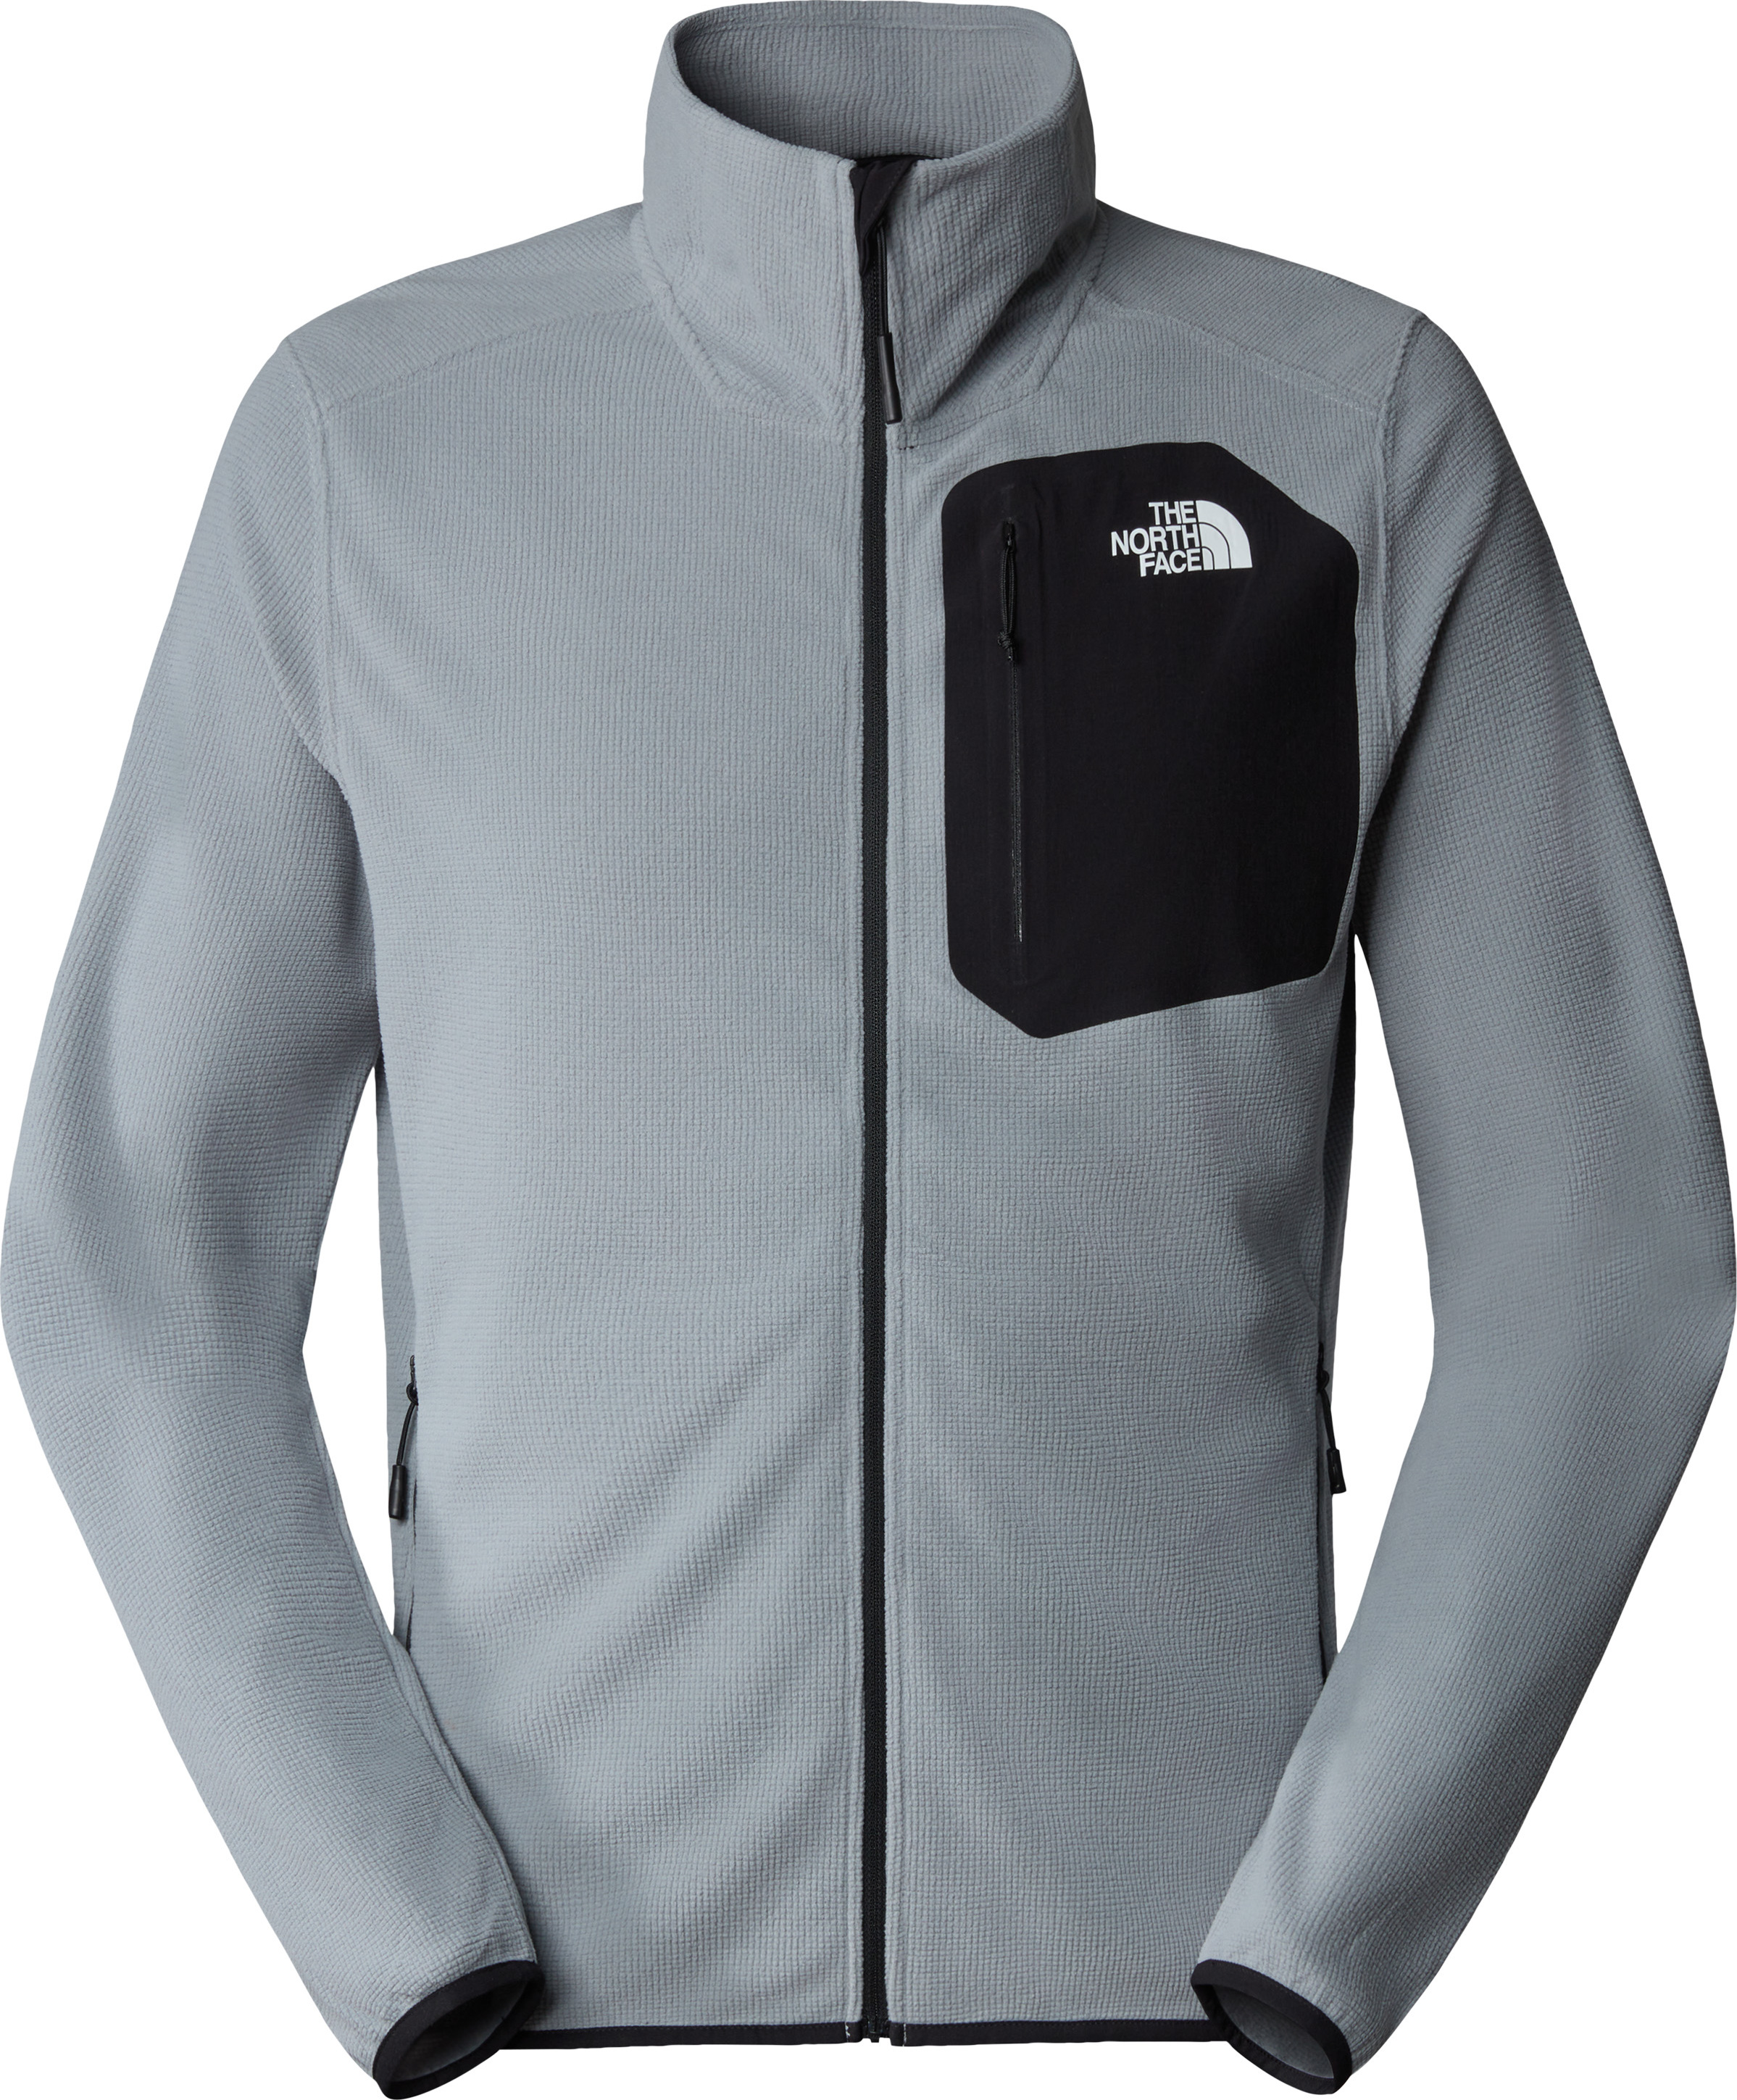 The North Face The North Face Men's Experit Grid Fleece Jacket Monument Grey/TNF Black XL, Monument Grey/Tnf Black